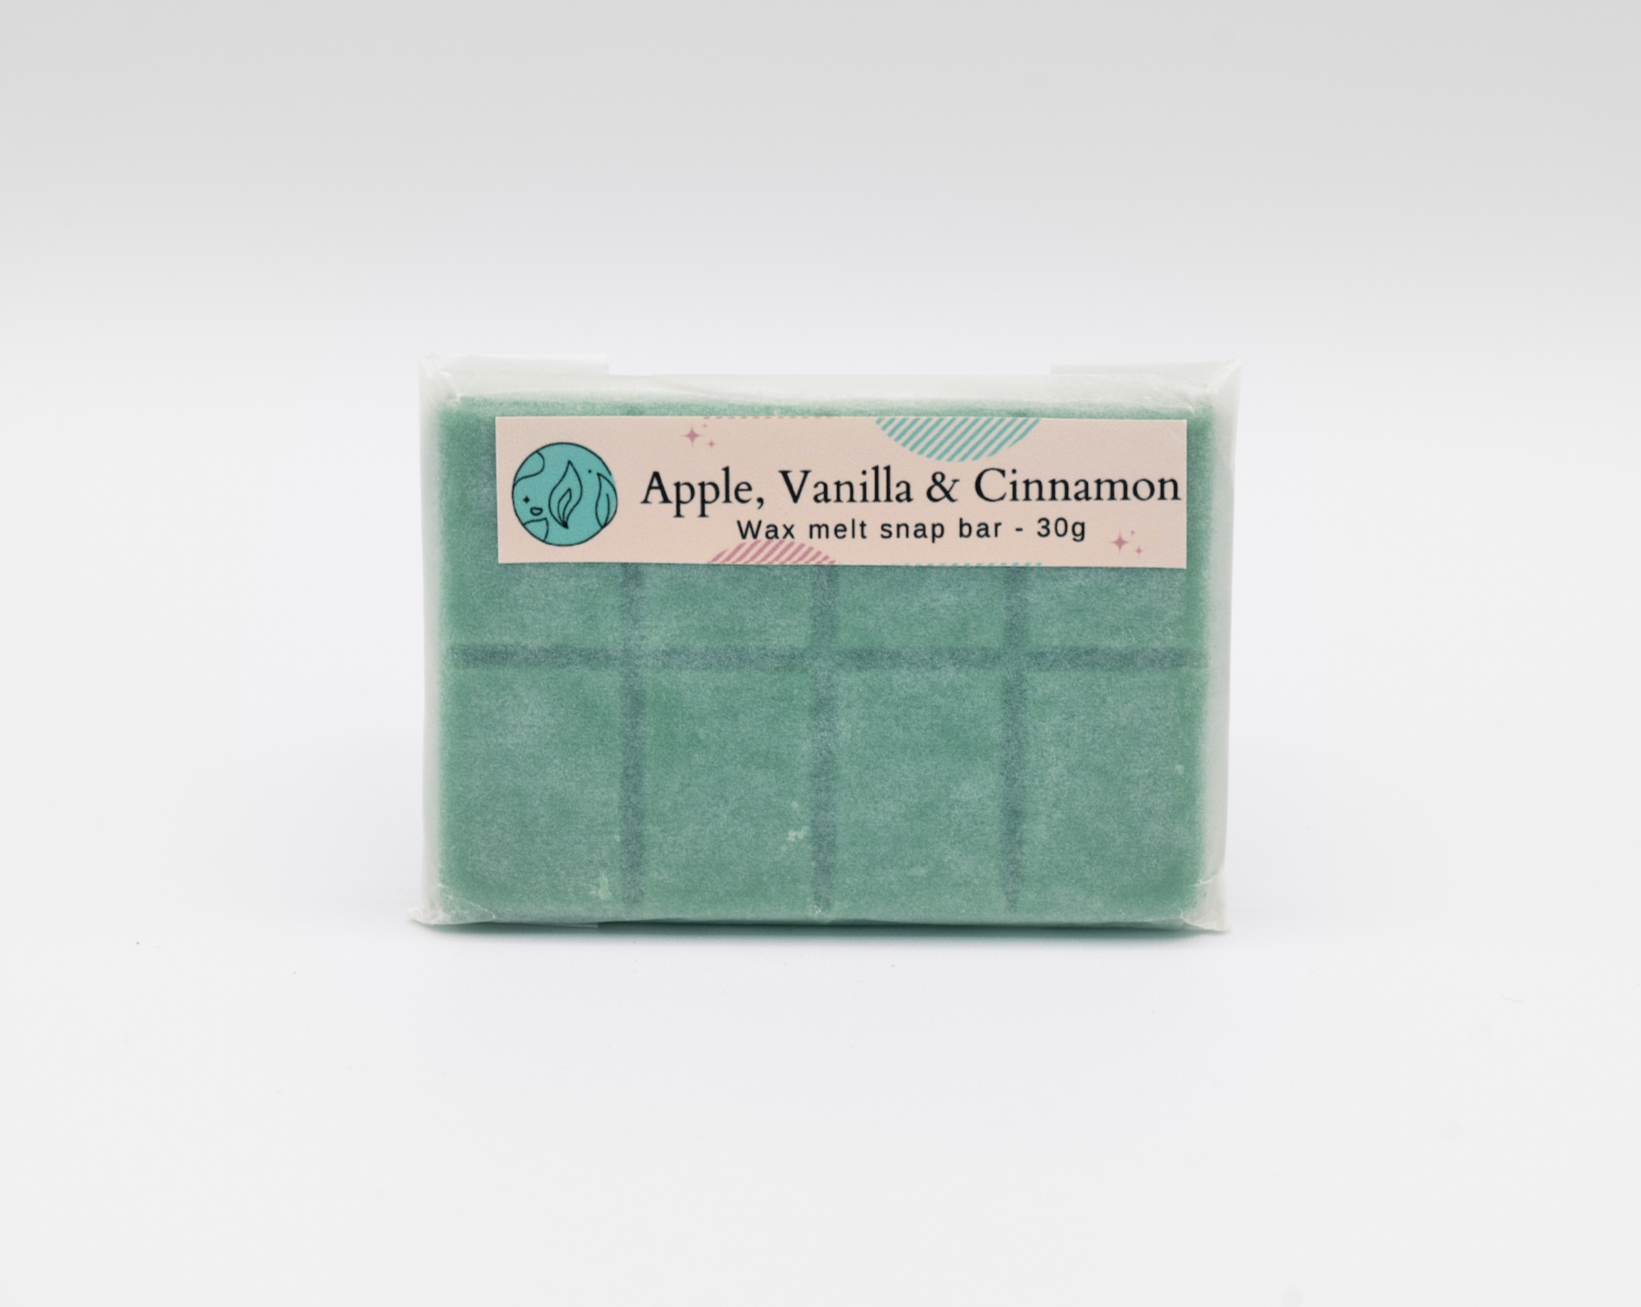 apple vanilla and cinnamon 30g or 90g strongly scented wax melt snap bars. Eco friendly waxed paper packaging. Brighton Rock Workshop wax melts made in Spain and the United Kingdom, available in two sizes. Suitable for tea light or electric burners